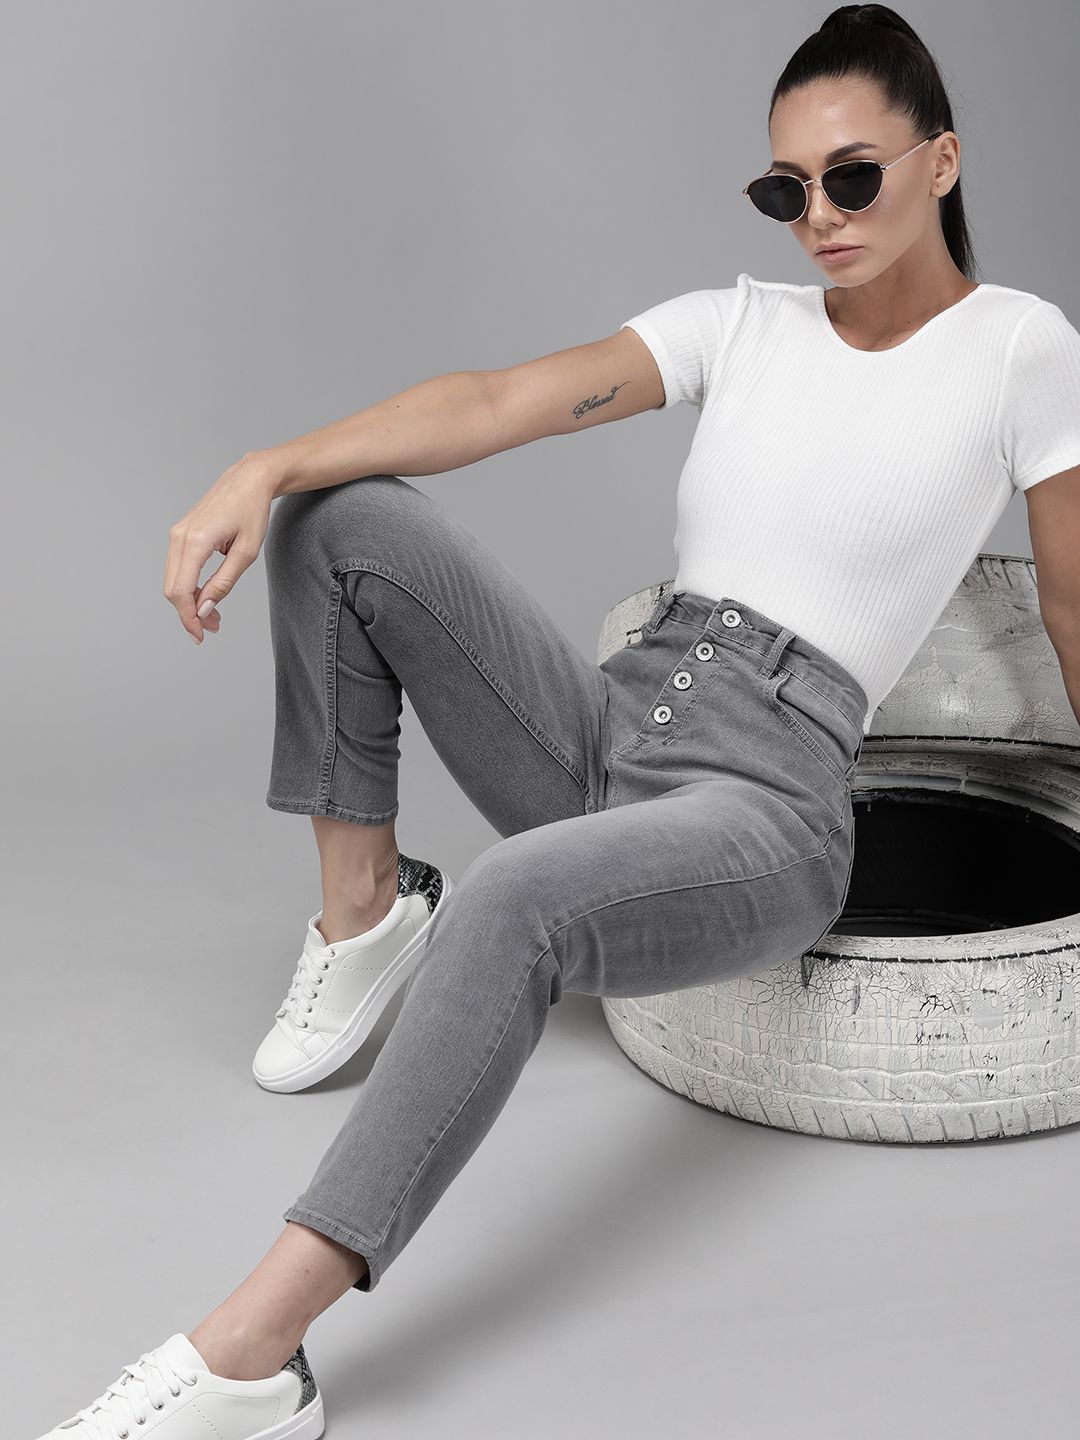 The Roadster Lifestyle Co Women Grey Slim New Fit Light Fade Stretchable Jeans Price in India